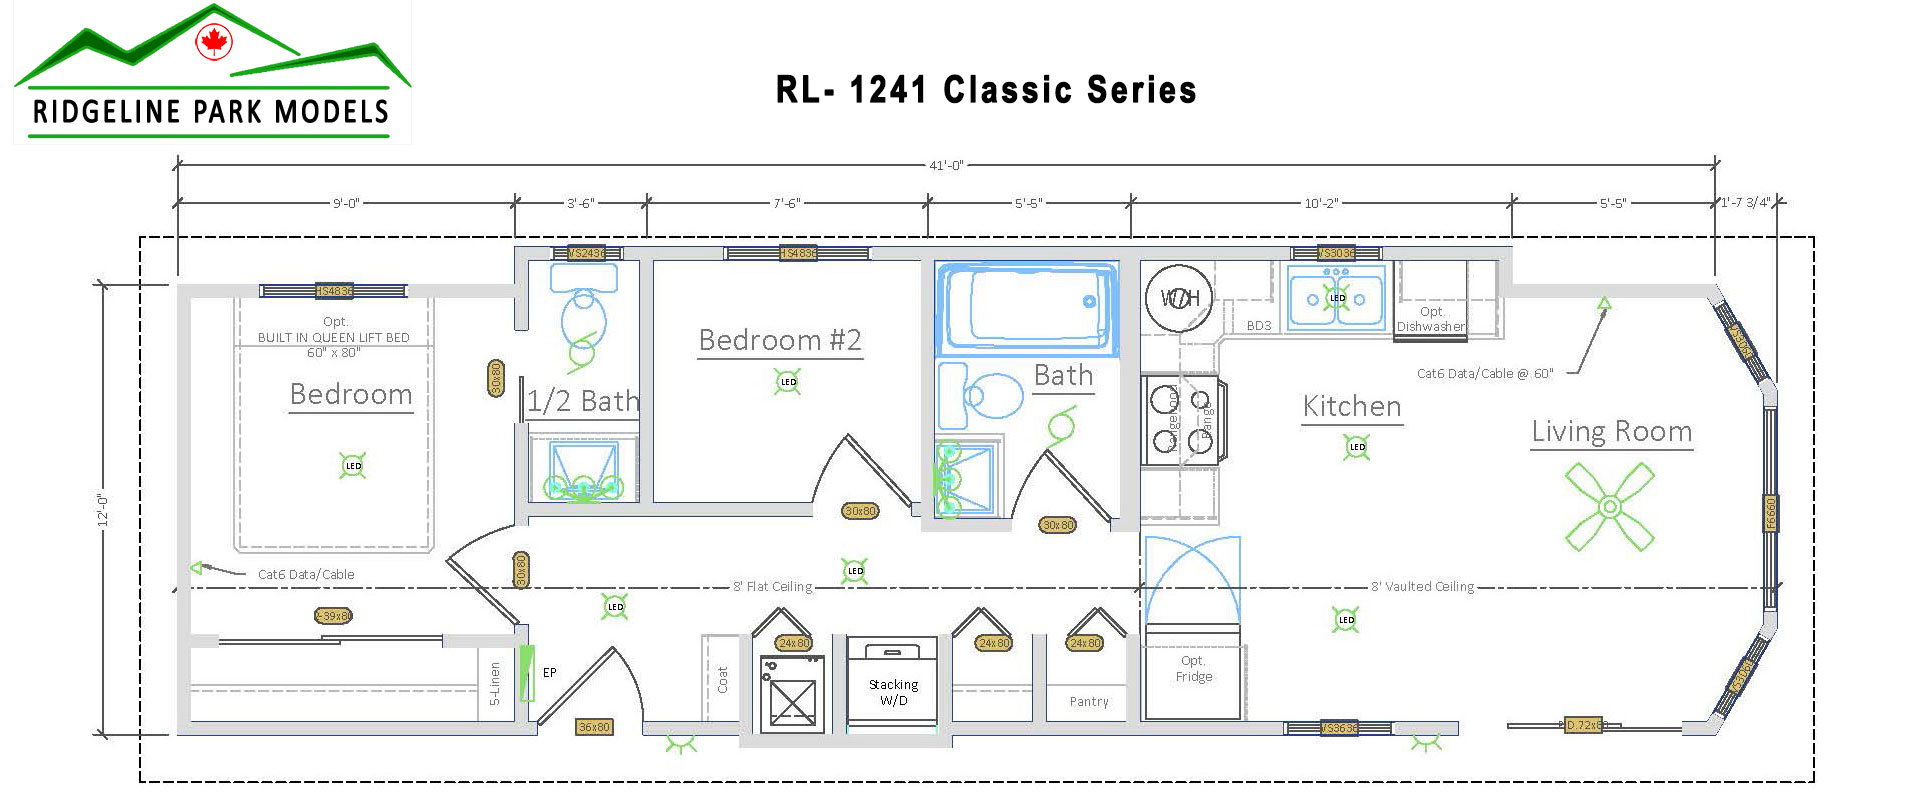 Plan RL-1238 from Ridgeline Park Models serving the Okanagan Valley and all British Columbia locations.